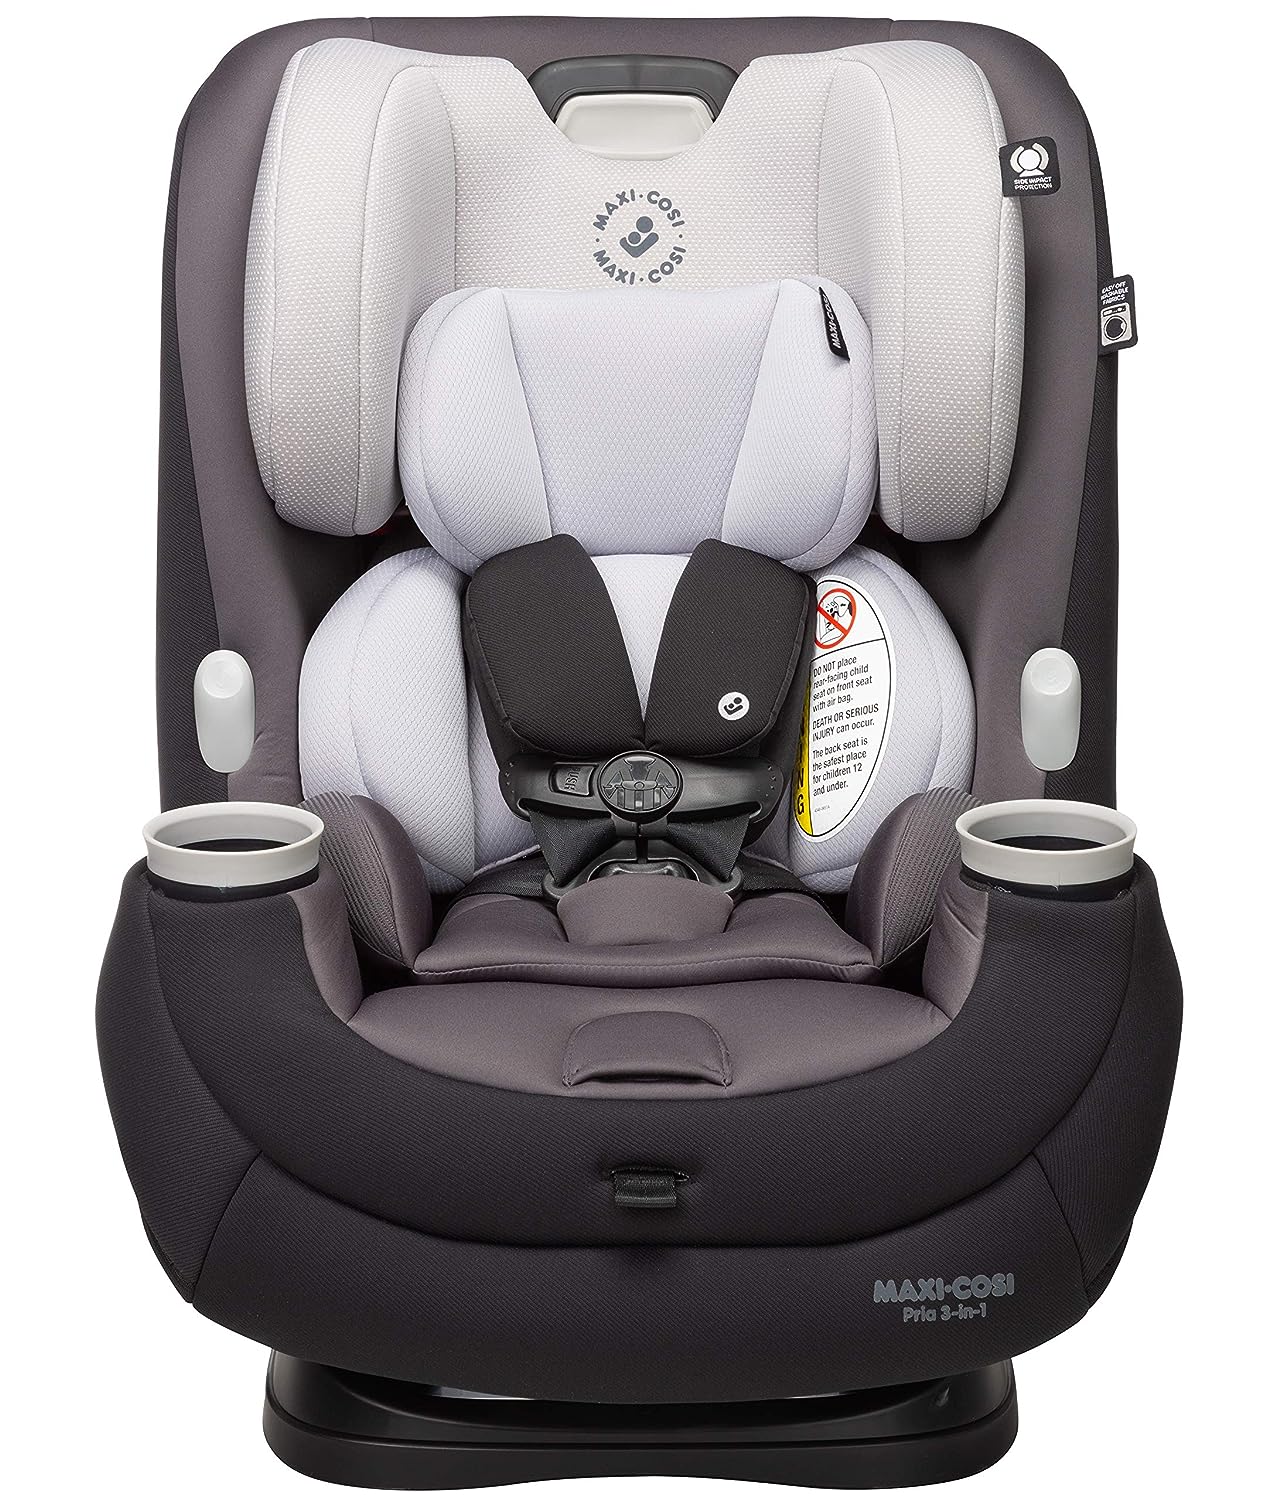 Maxi-Cosi Pria All-in-One Convertible Car Seat: A Comprehensive Review